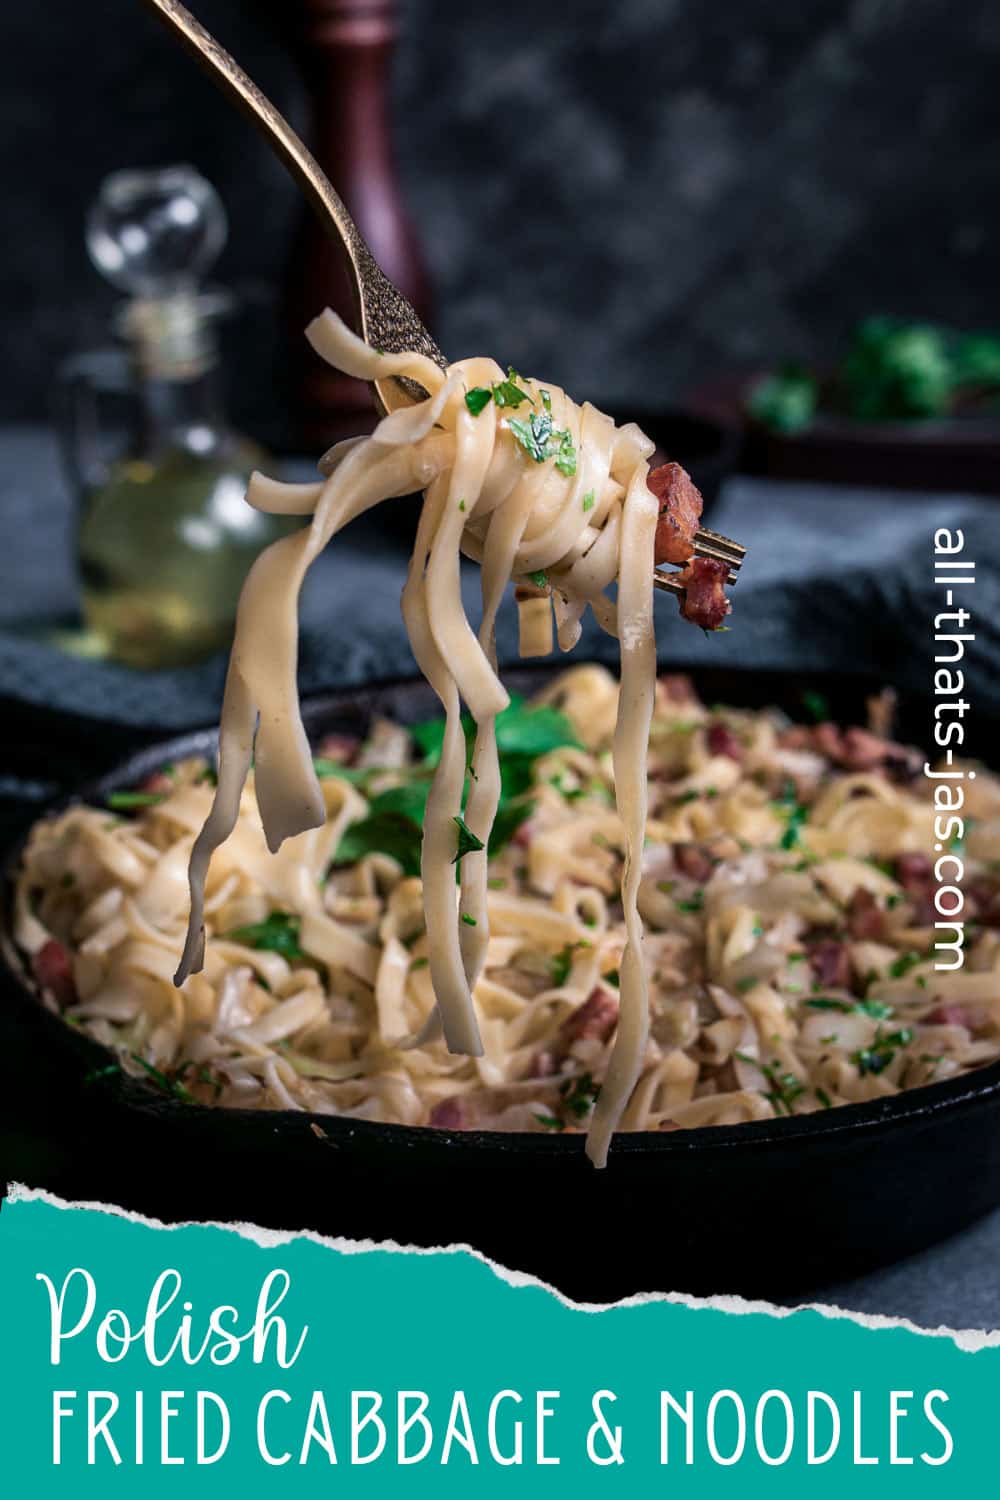 Fried cabbage and noodles on a fork with bacon photo with a text overlay.